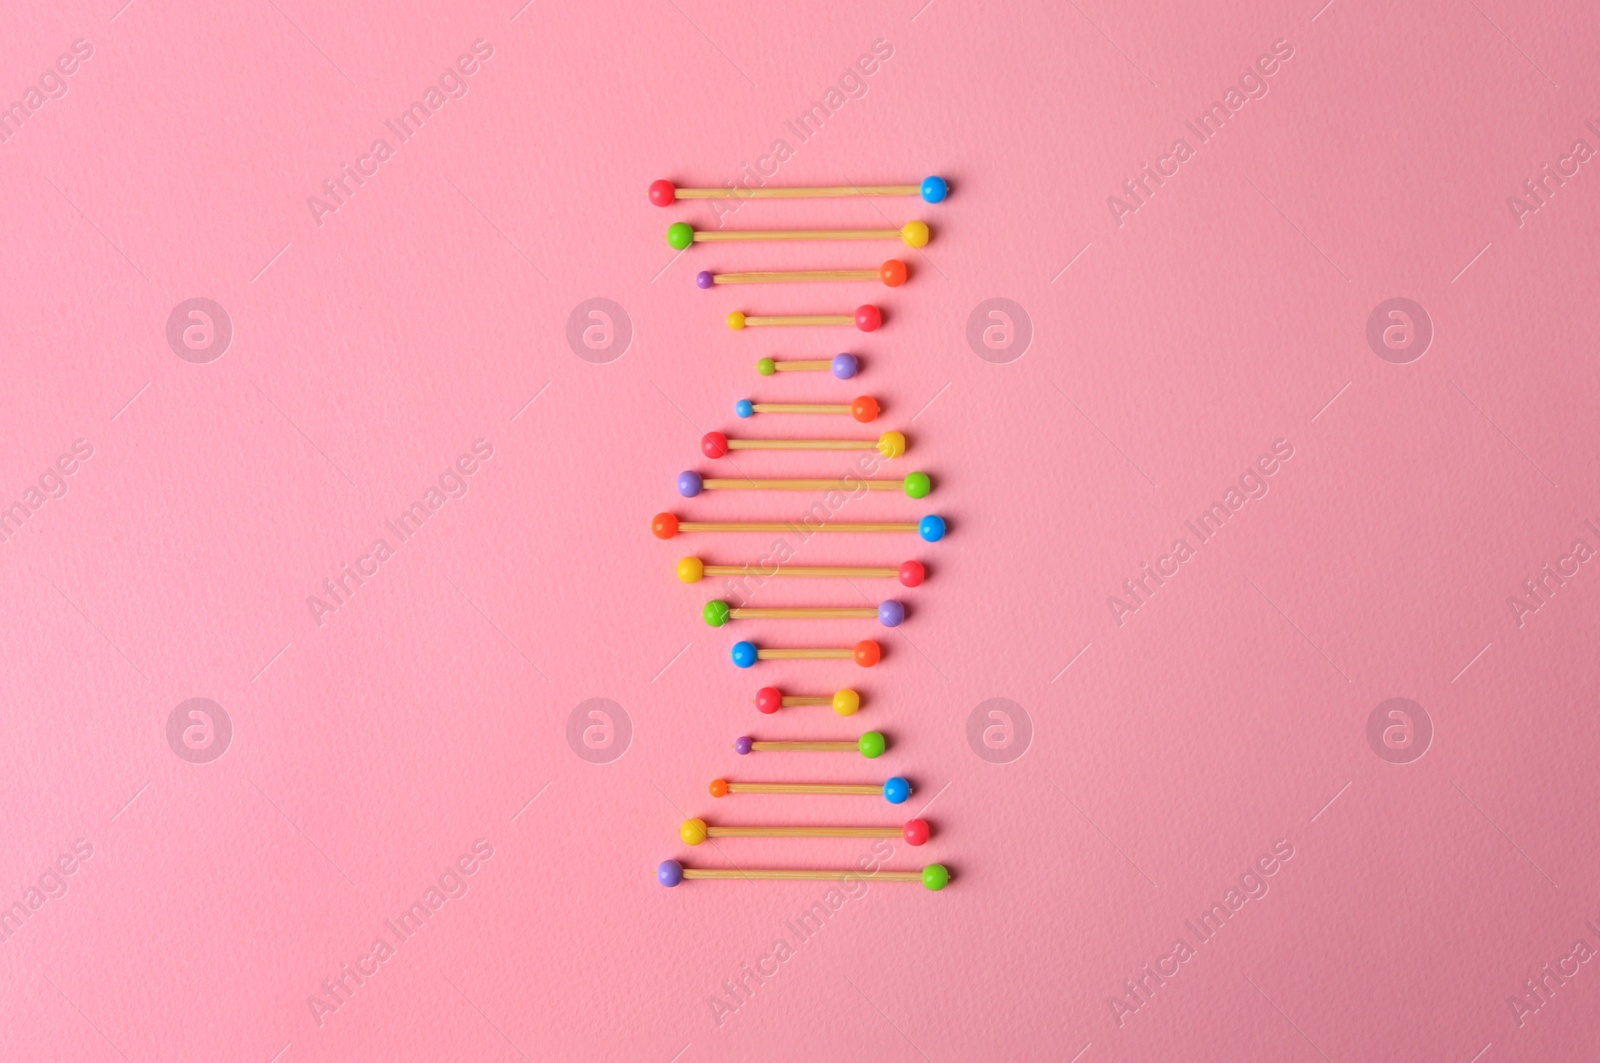 Photo of Model of DNA molecular chain on pink background, top view